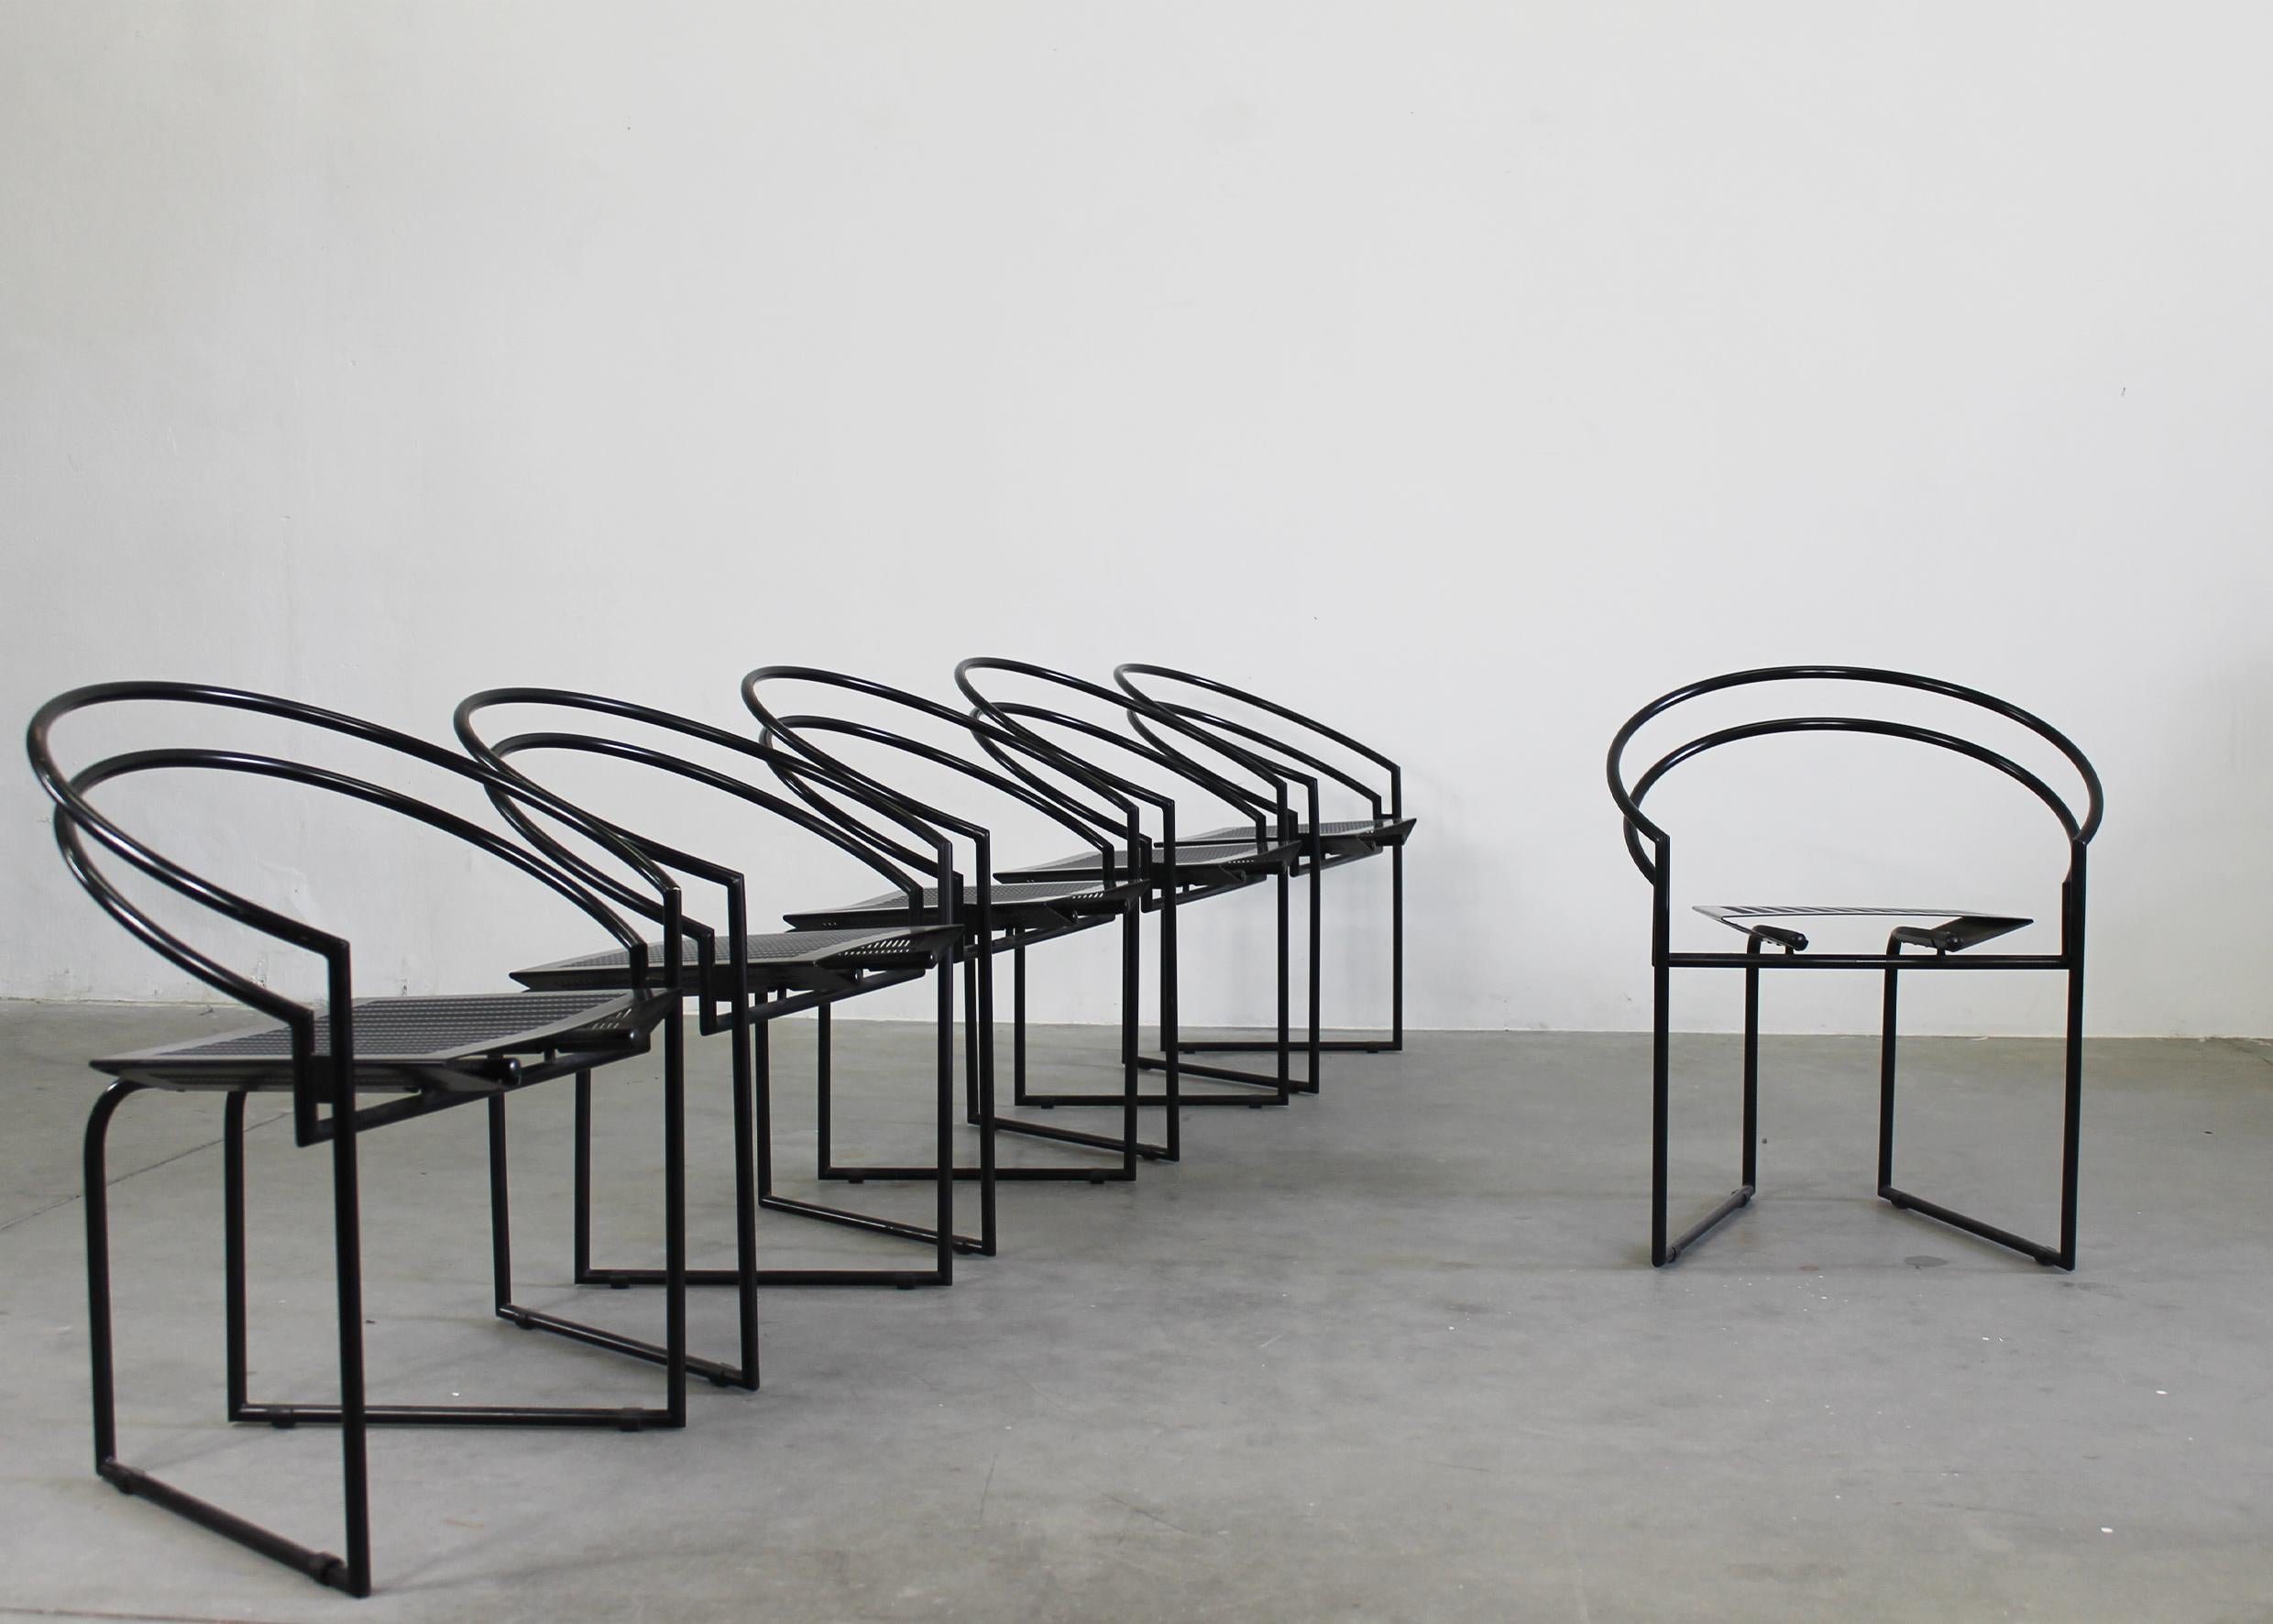 Set of six 614 or La Tonda chairs in black lacquered tubular metal frame with seats in black lacquered perforated sheet metal, designed by Mario Botta and produced by Alias in 1980s.

The manufacturer's label is visible on the chair's frame, under